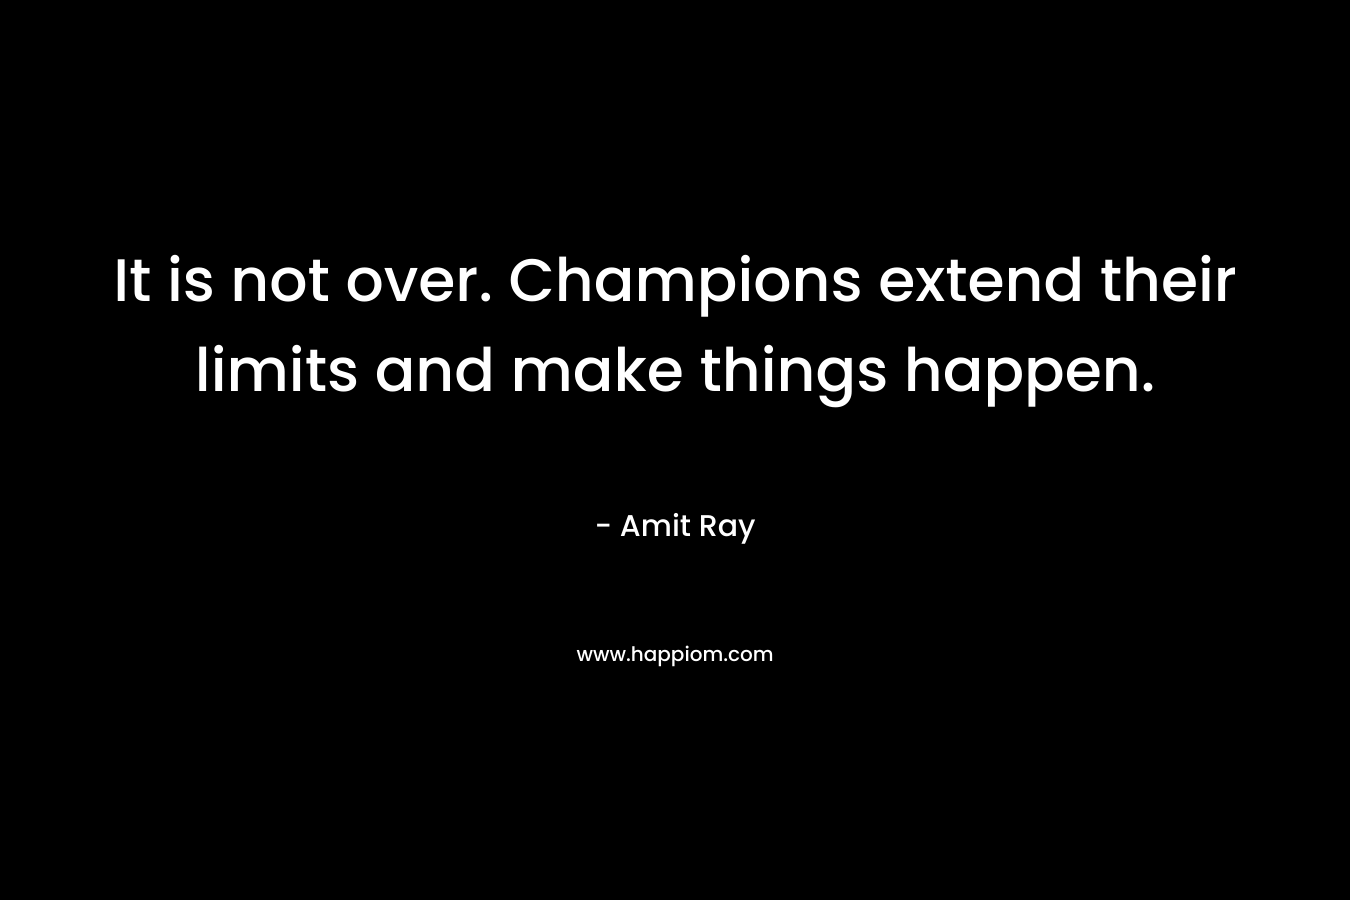 It is not over. Champions extend their limits and make things happen.